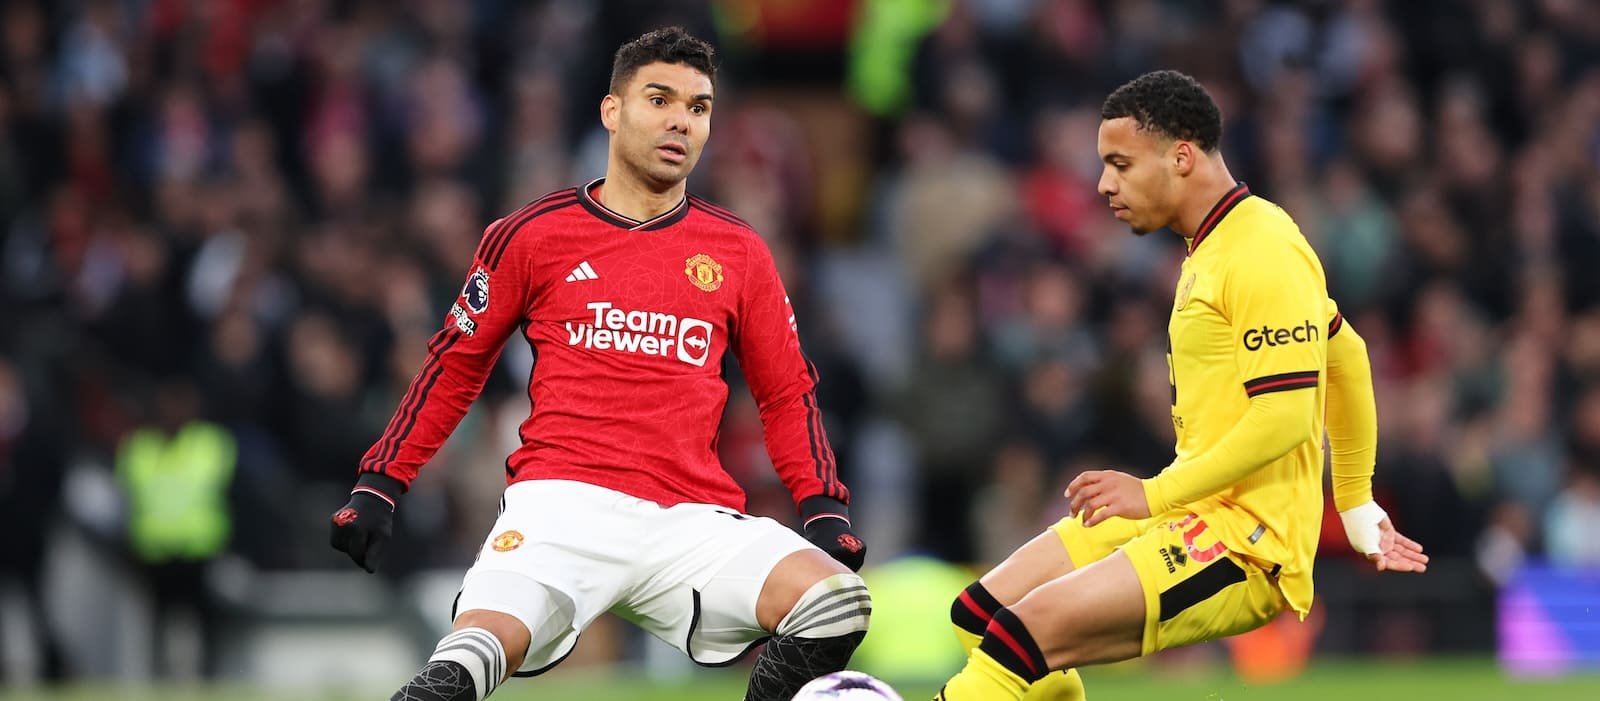 Galatasaray, Fenerbahce both eyeing summer move for Manchester United’s Casemiro – Man United News And Transfer News